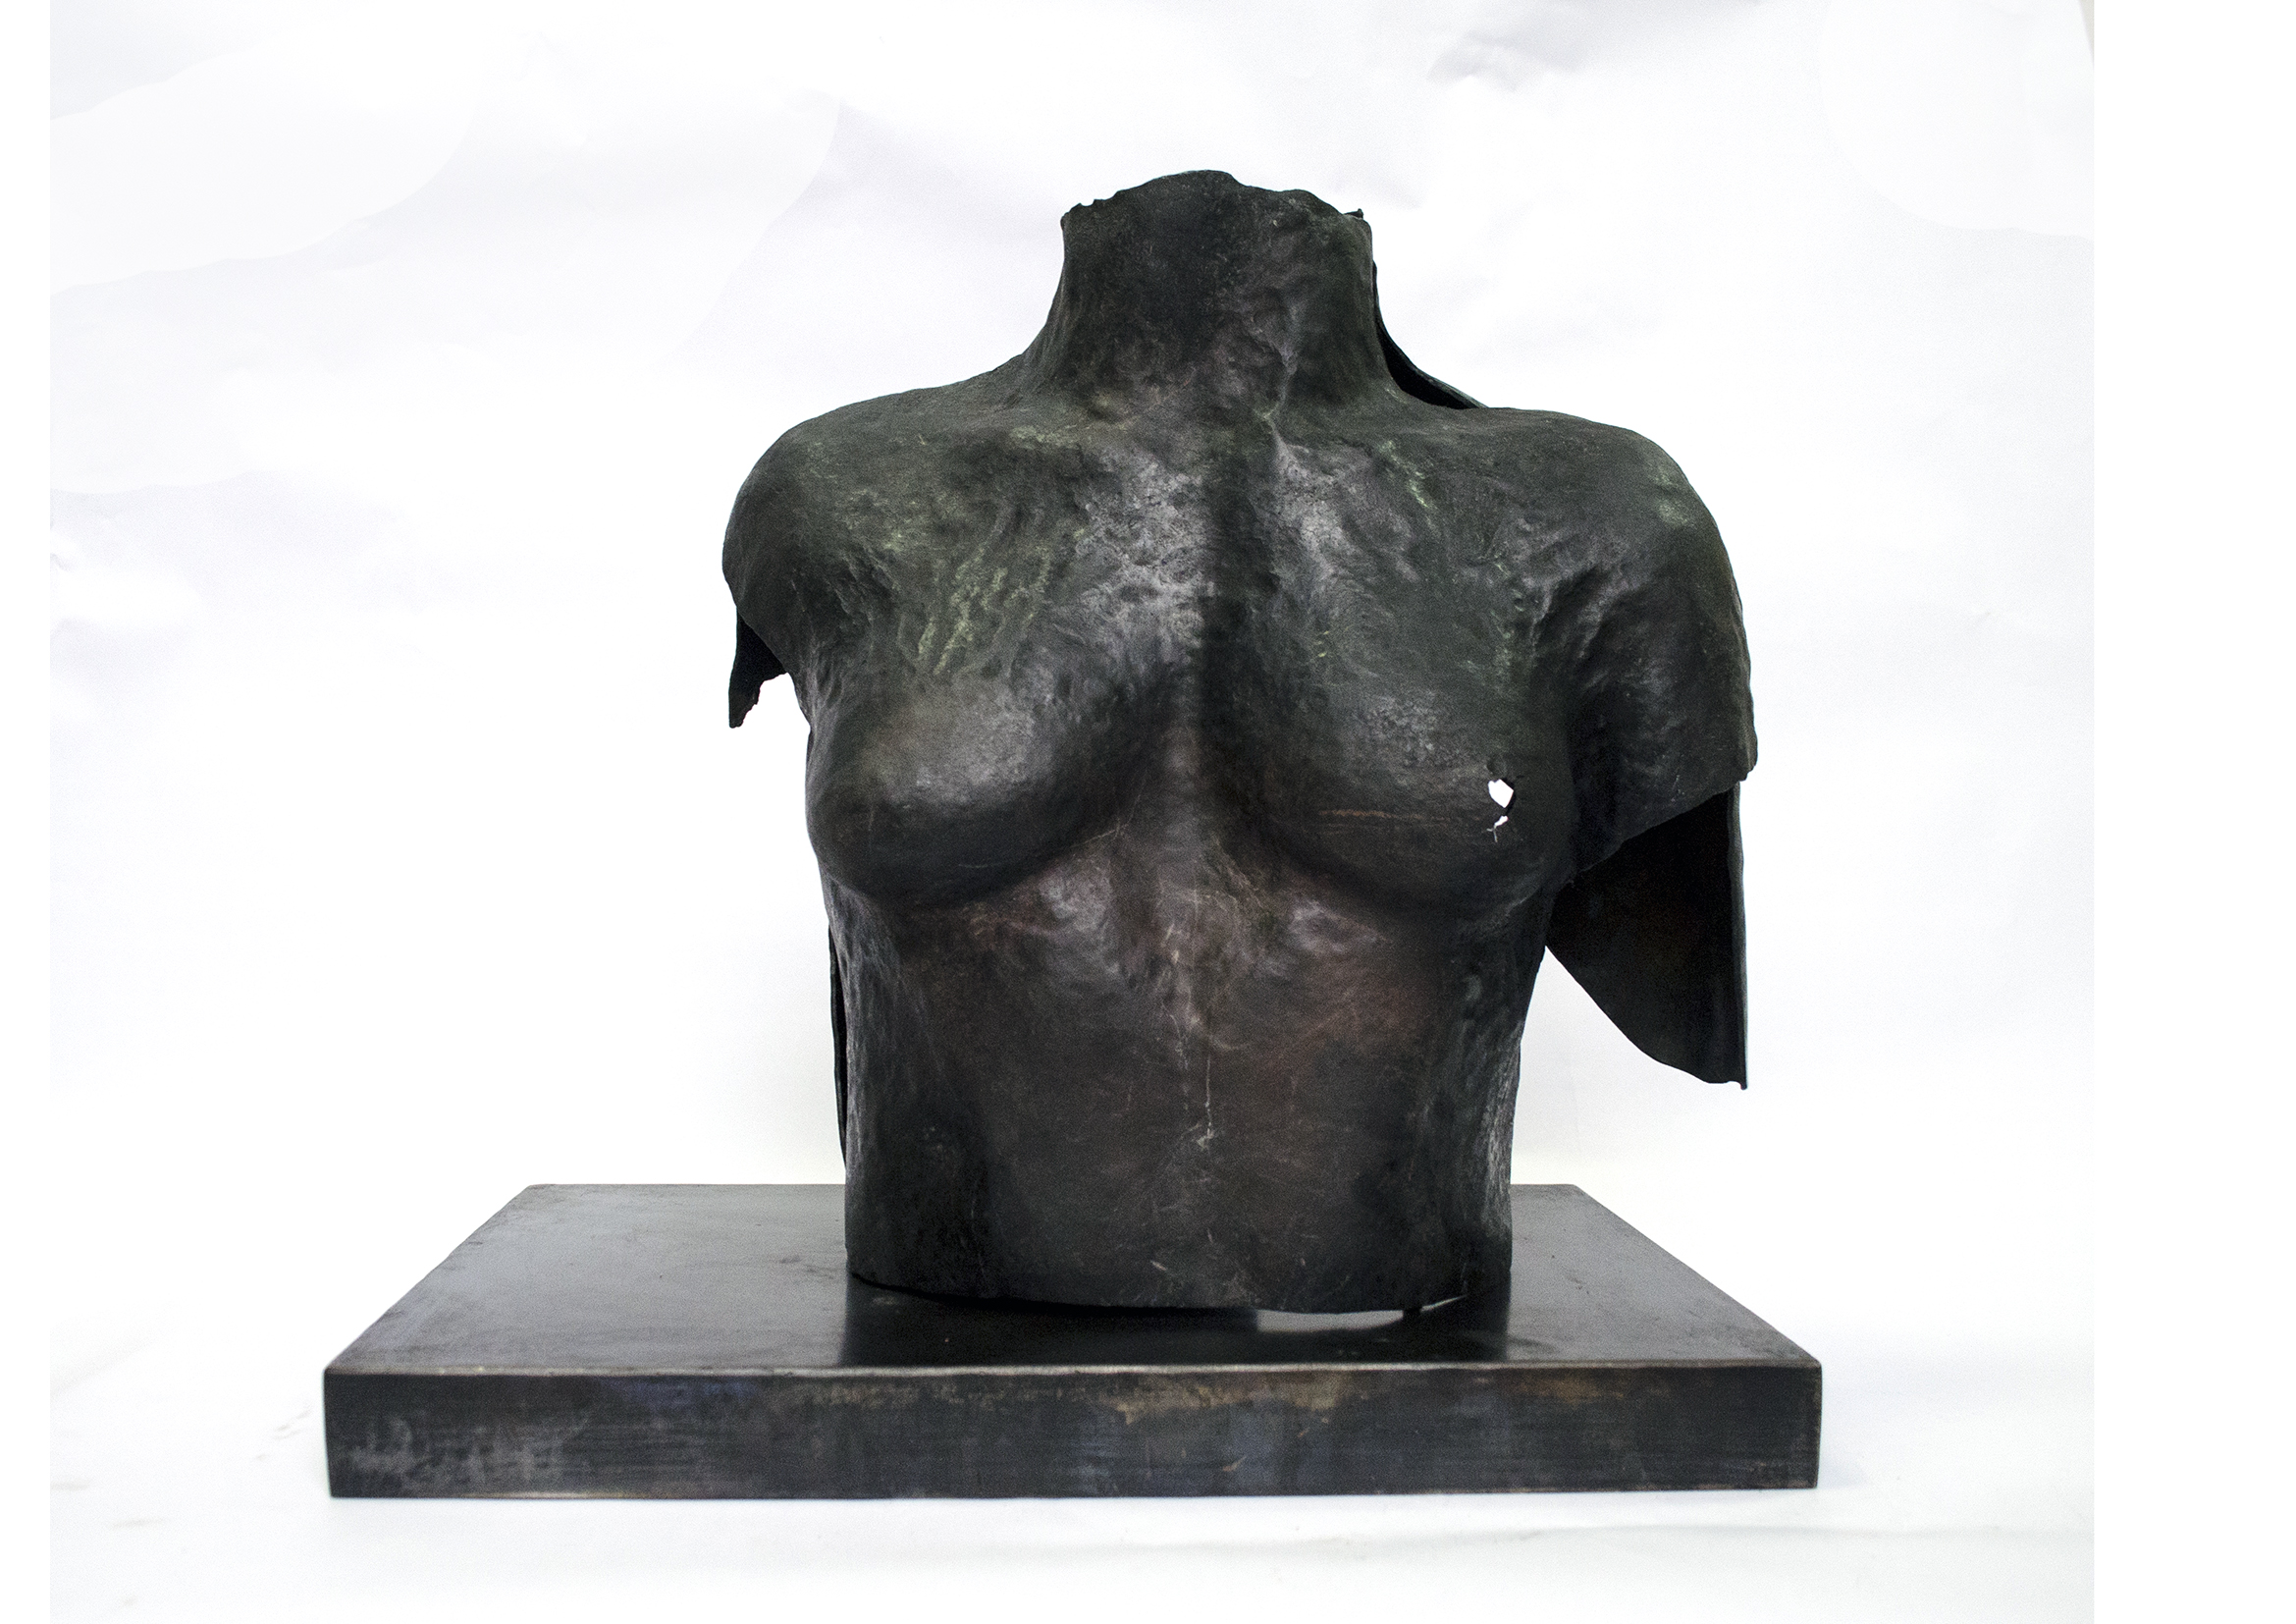  Bodytype02  Forged and welded Iron  50x40x30 cm 